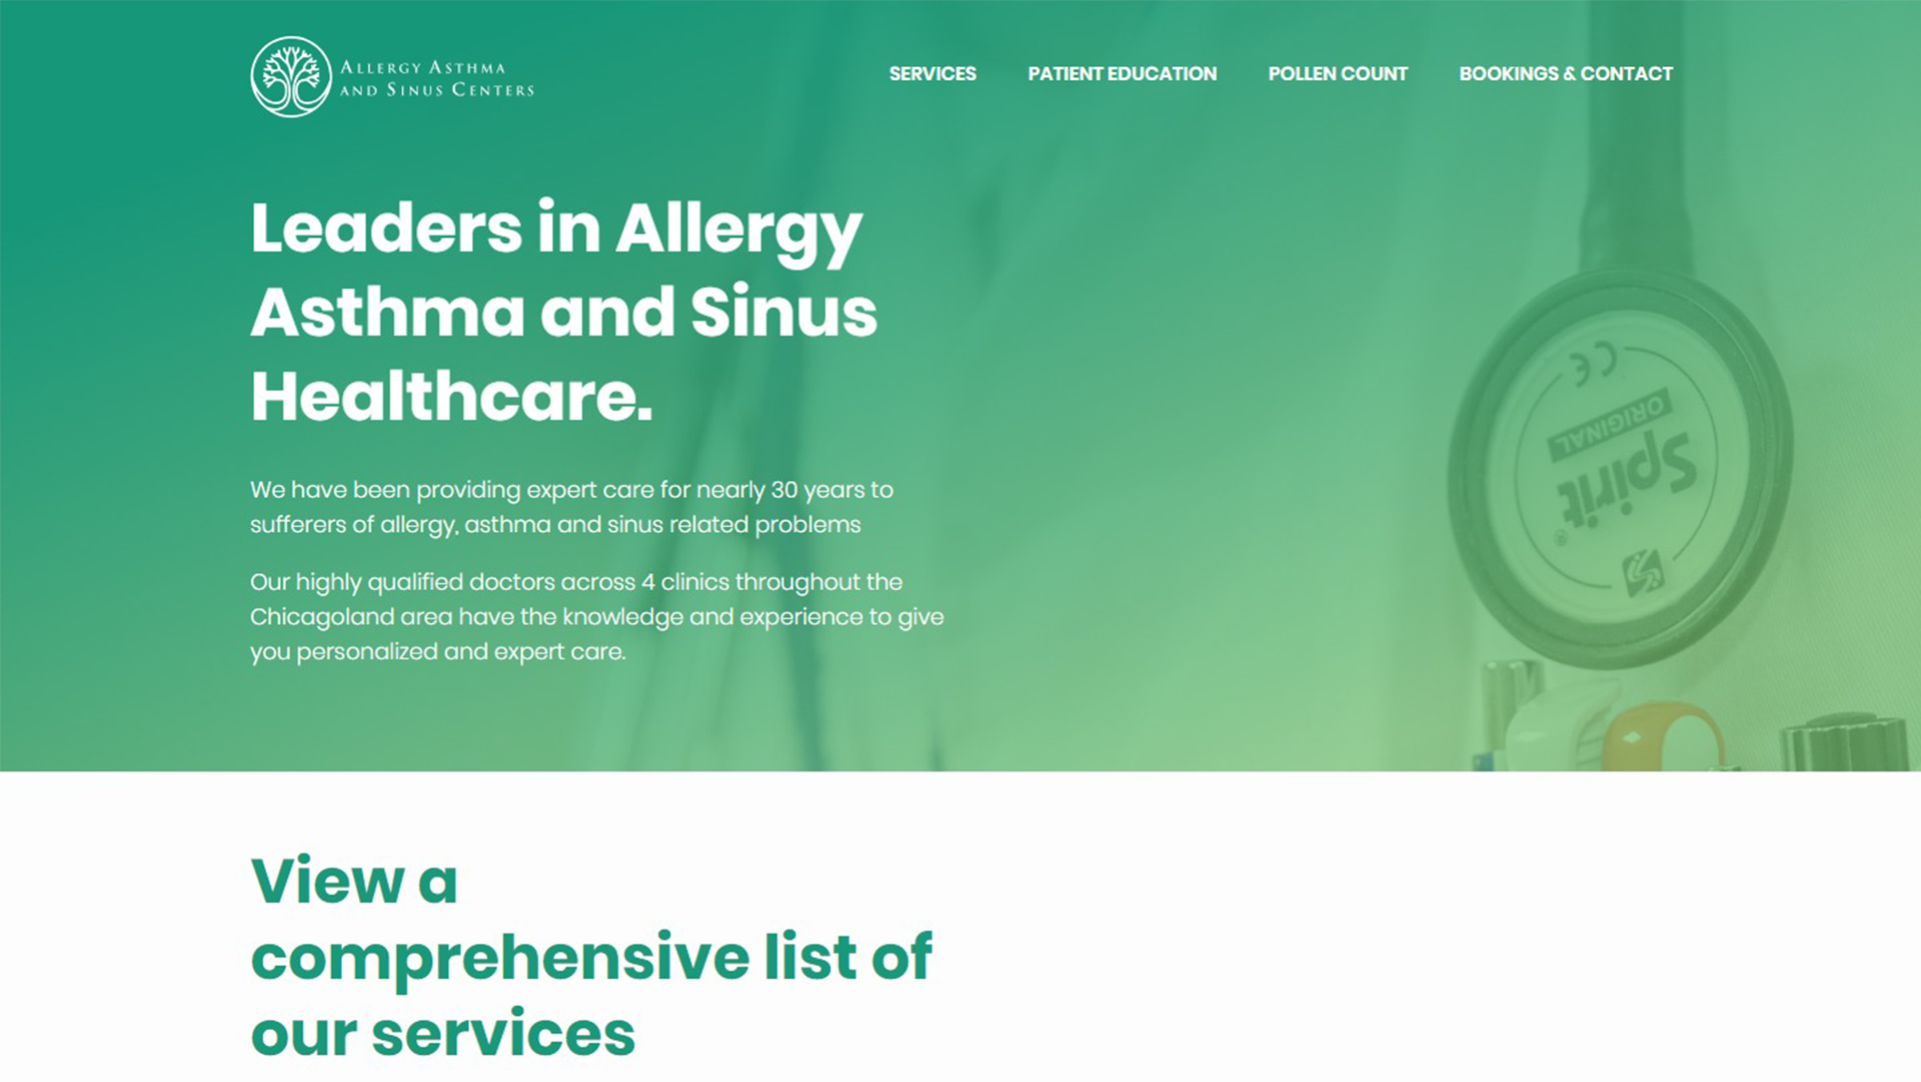 New Allergy Asthma and Sinus Centers Website